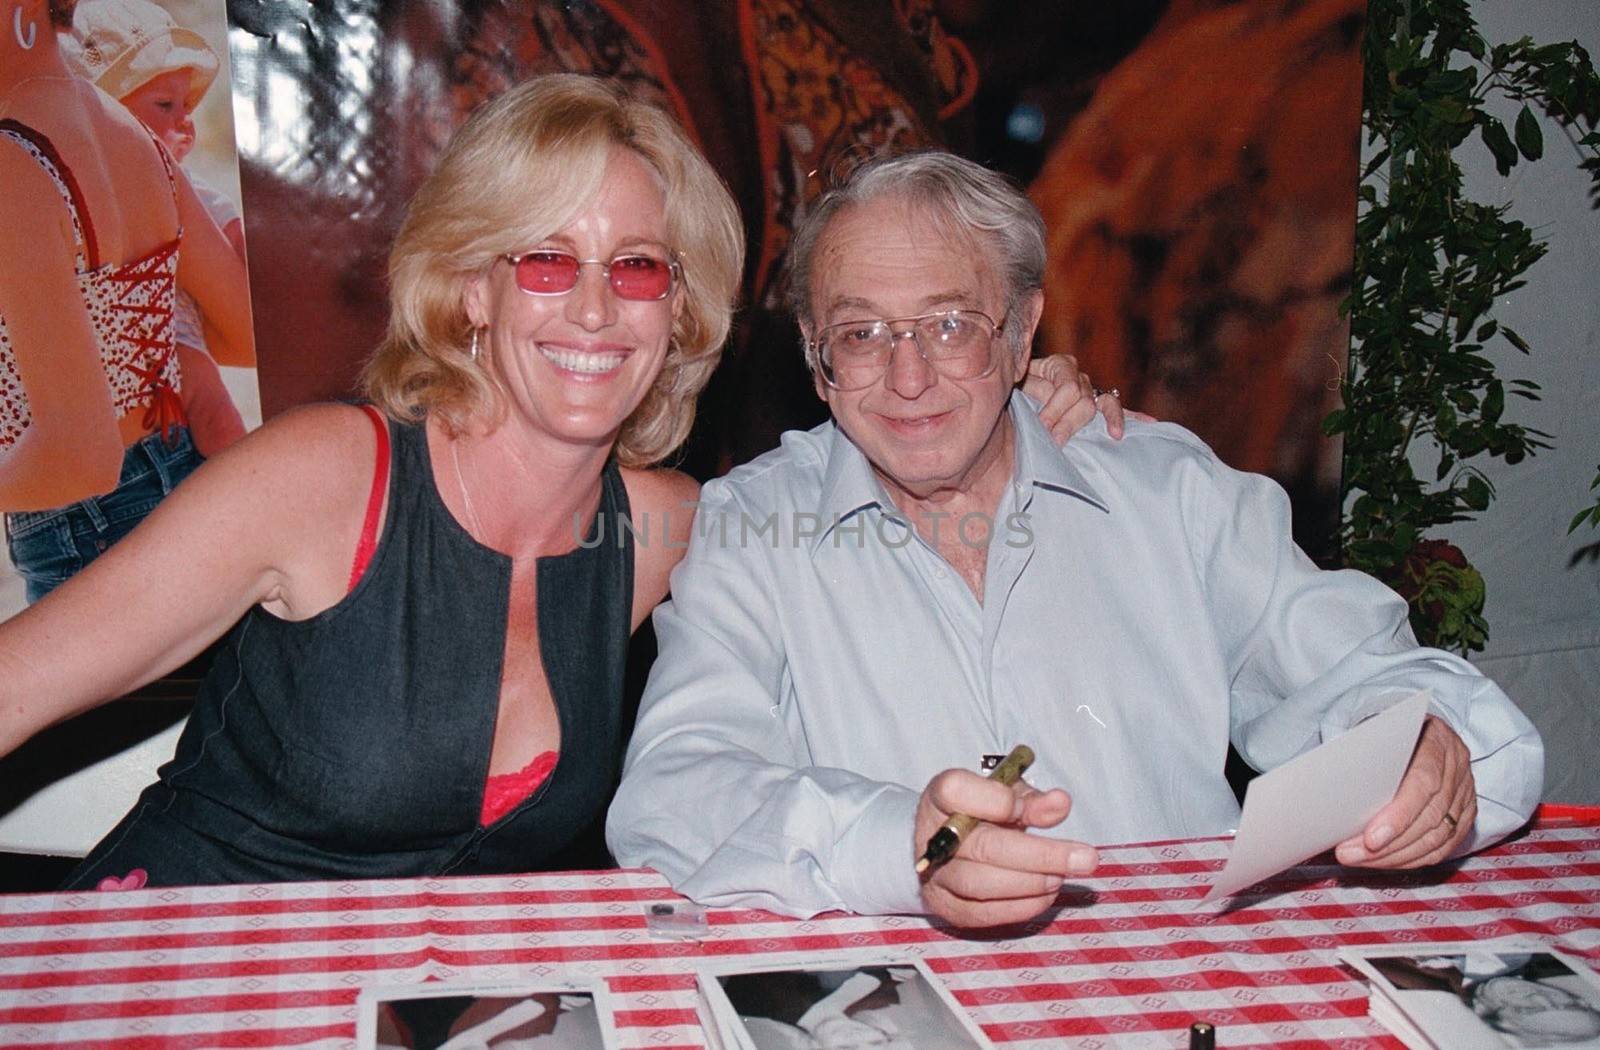 Erin Brockovich and Ed Masry at the video release party for the film in Barstow. 08-15-00